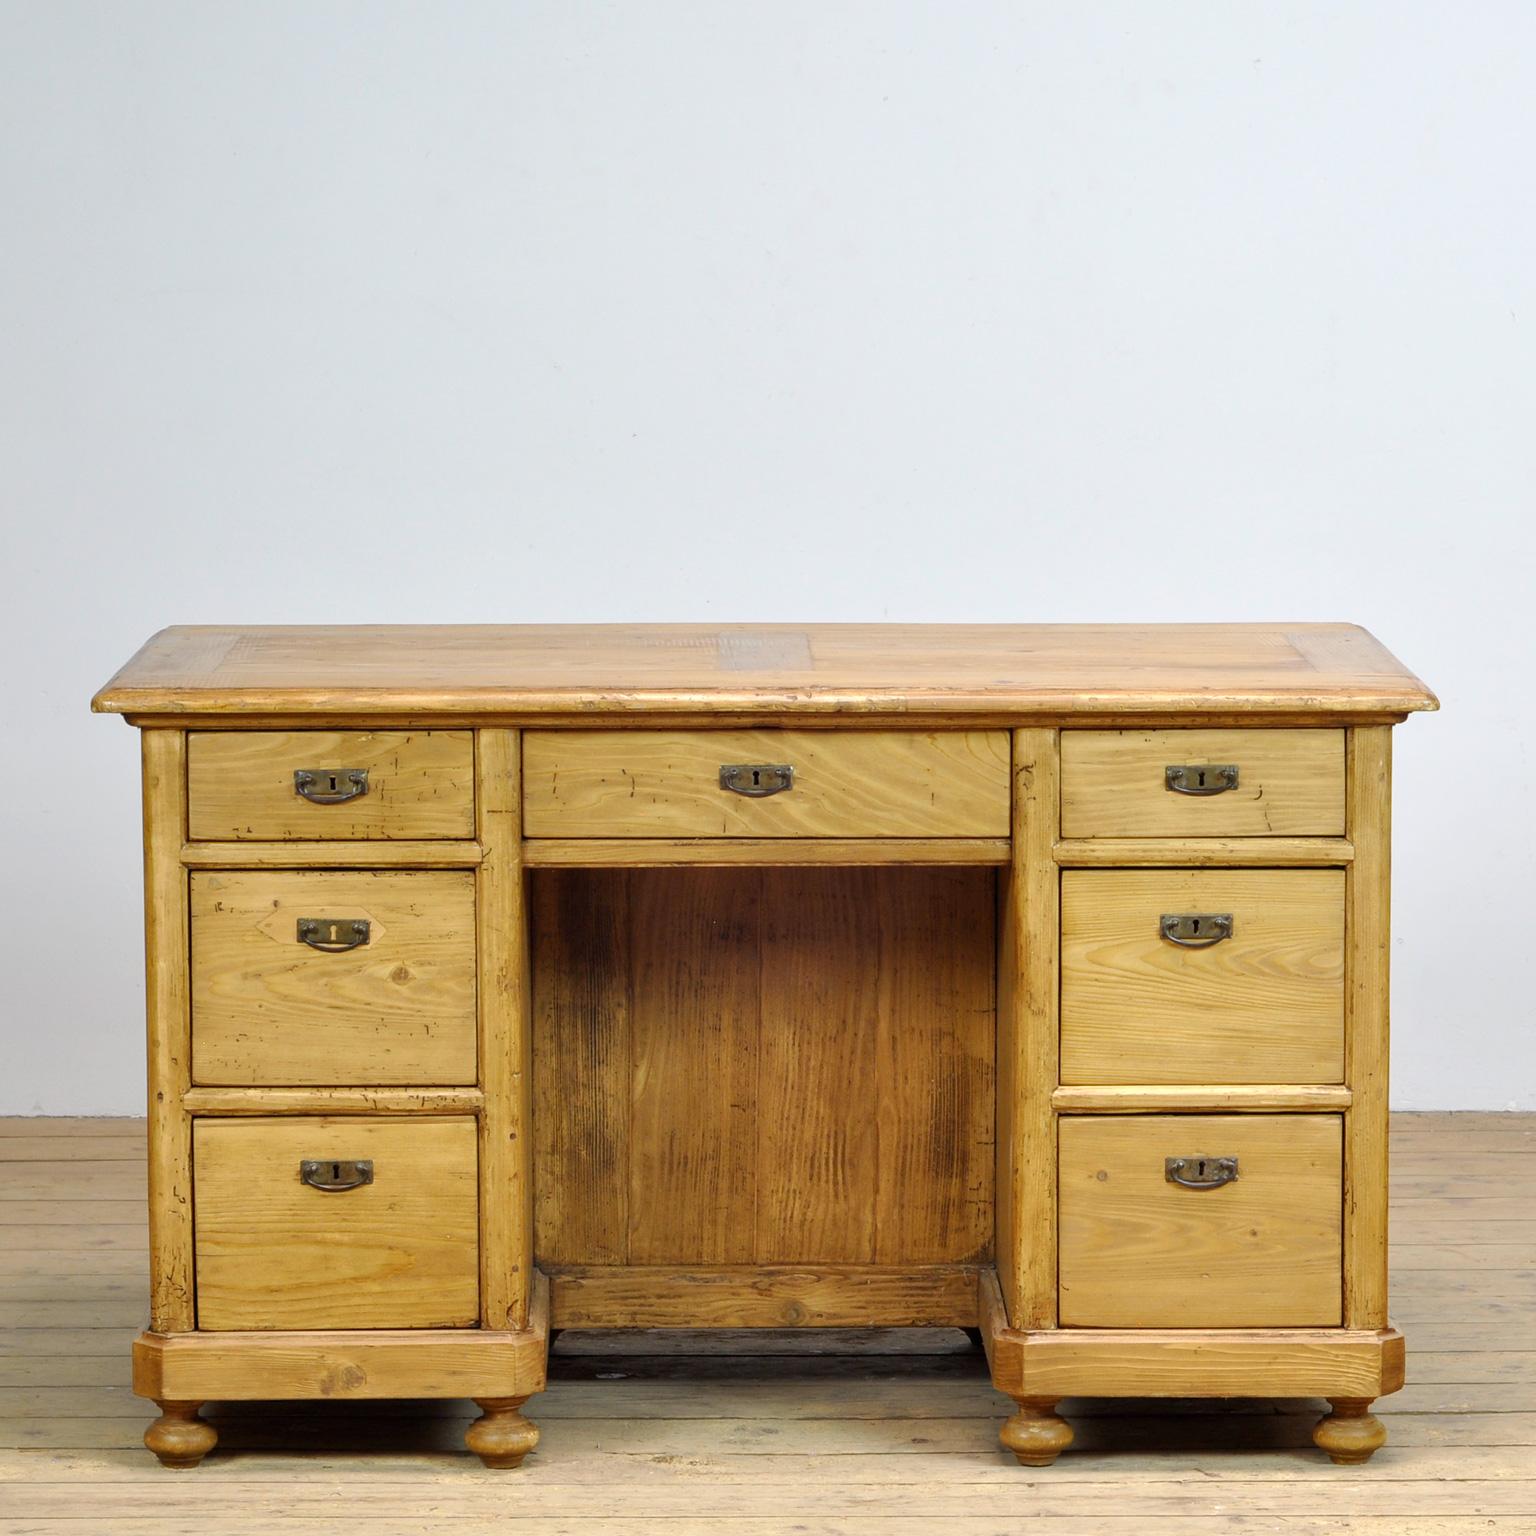 Charming pine desk, European in style. Solid pine, good rustic condition, with cosmetic wear and tear commensurate with age. 7 Drawers in the front, which open and close ok. On the back an other storage space behind a door.